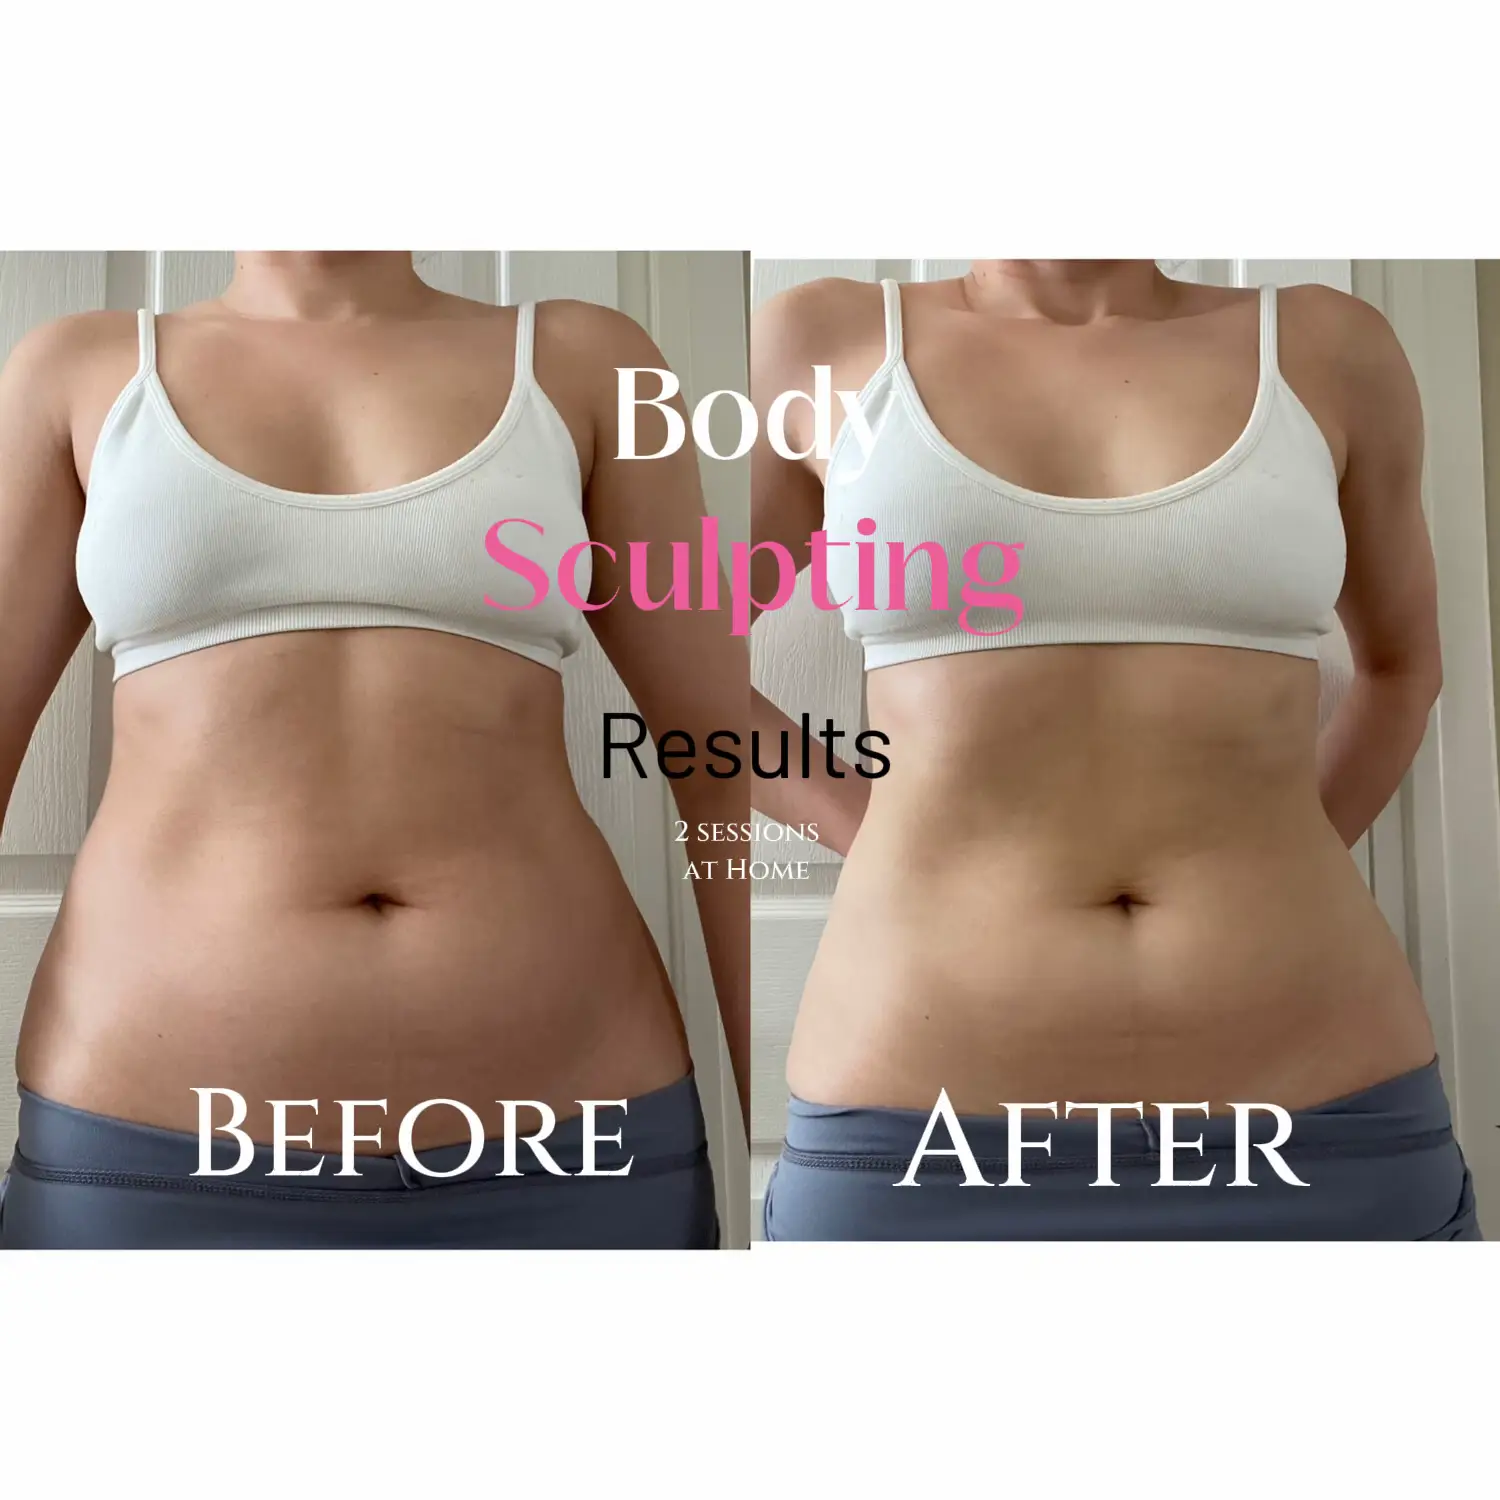 Body Sculpting Results, Gallery posted by SCULPTSKIN